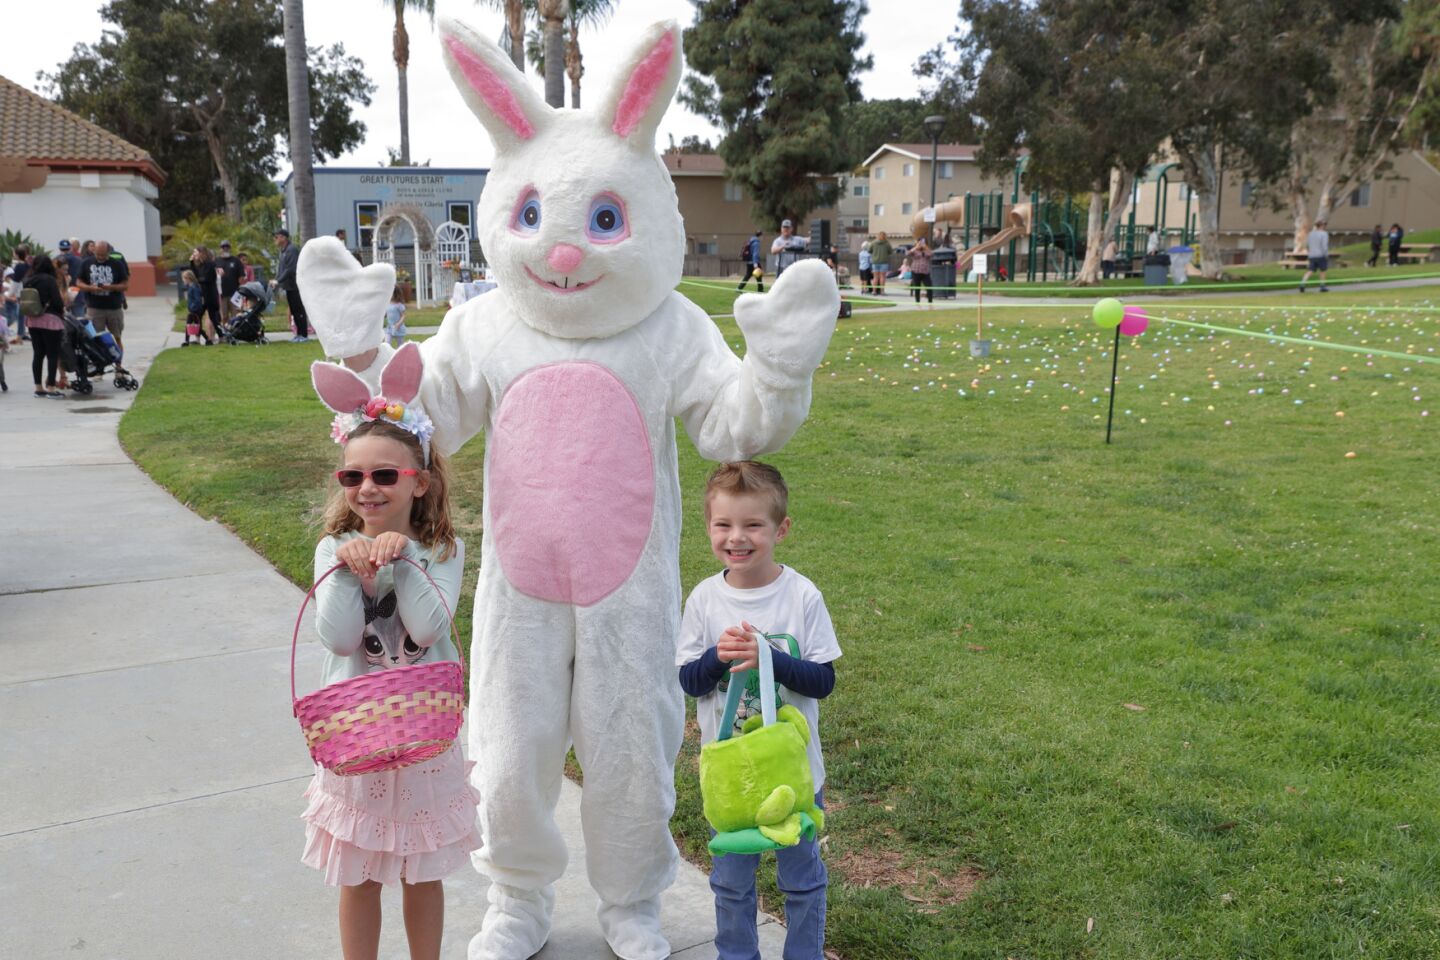 Karinna Miholich and Joseph Slack visit with the Easter Bunny